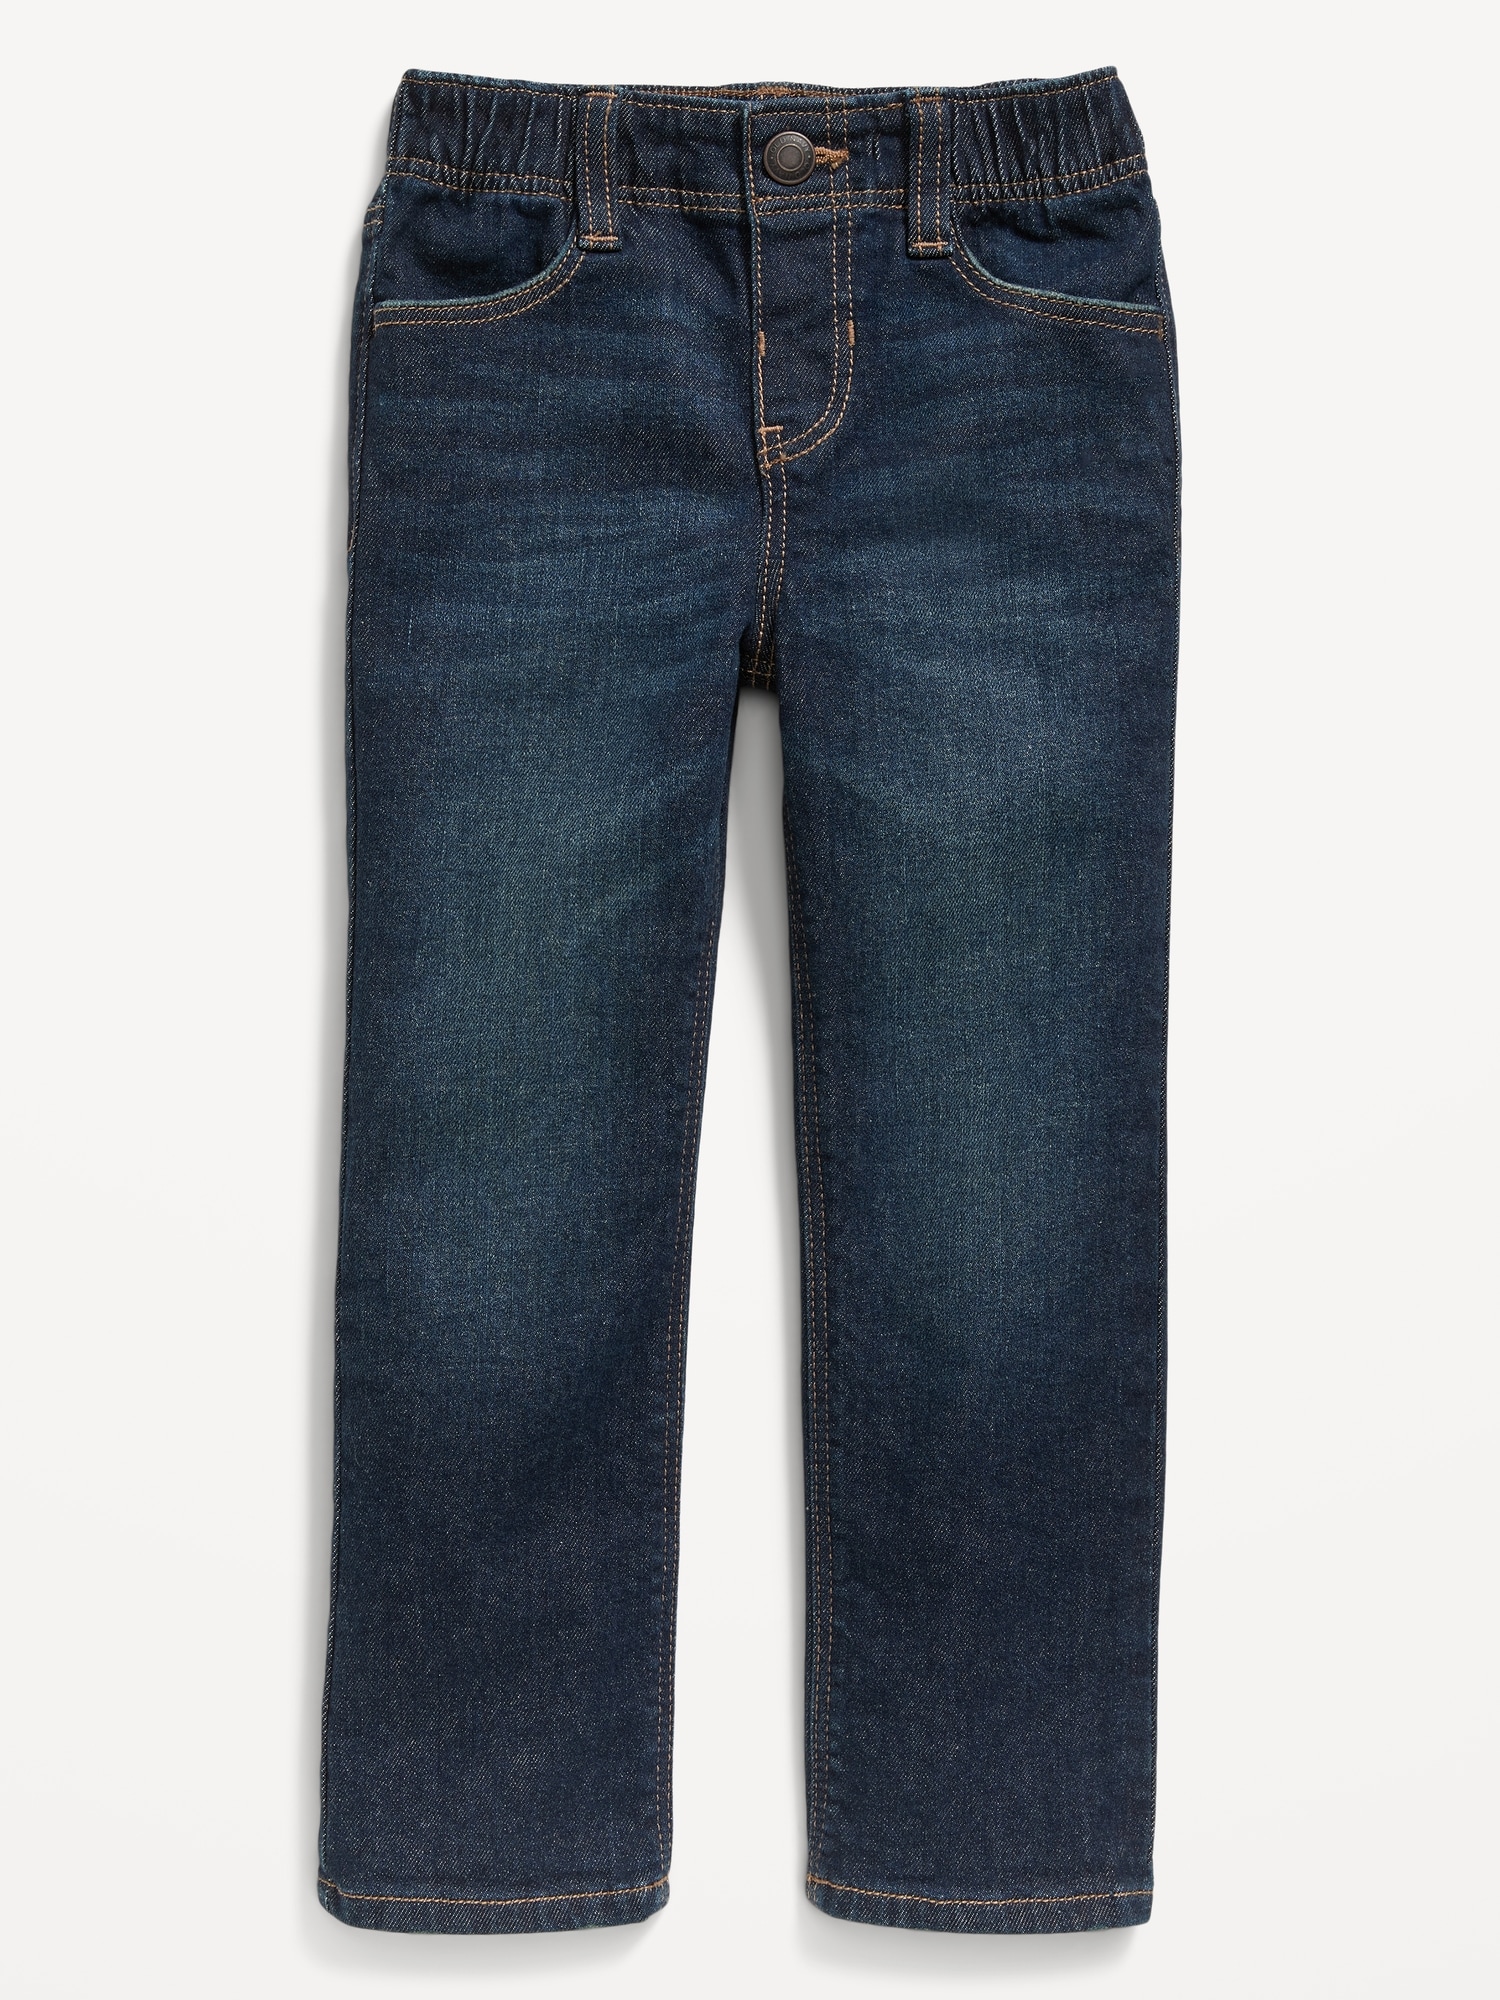 Soft Jeans for Toddlers